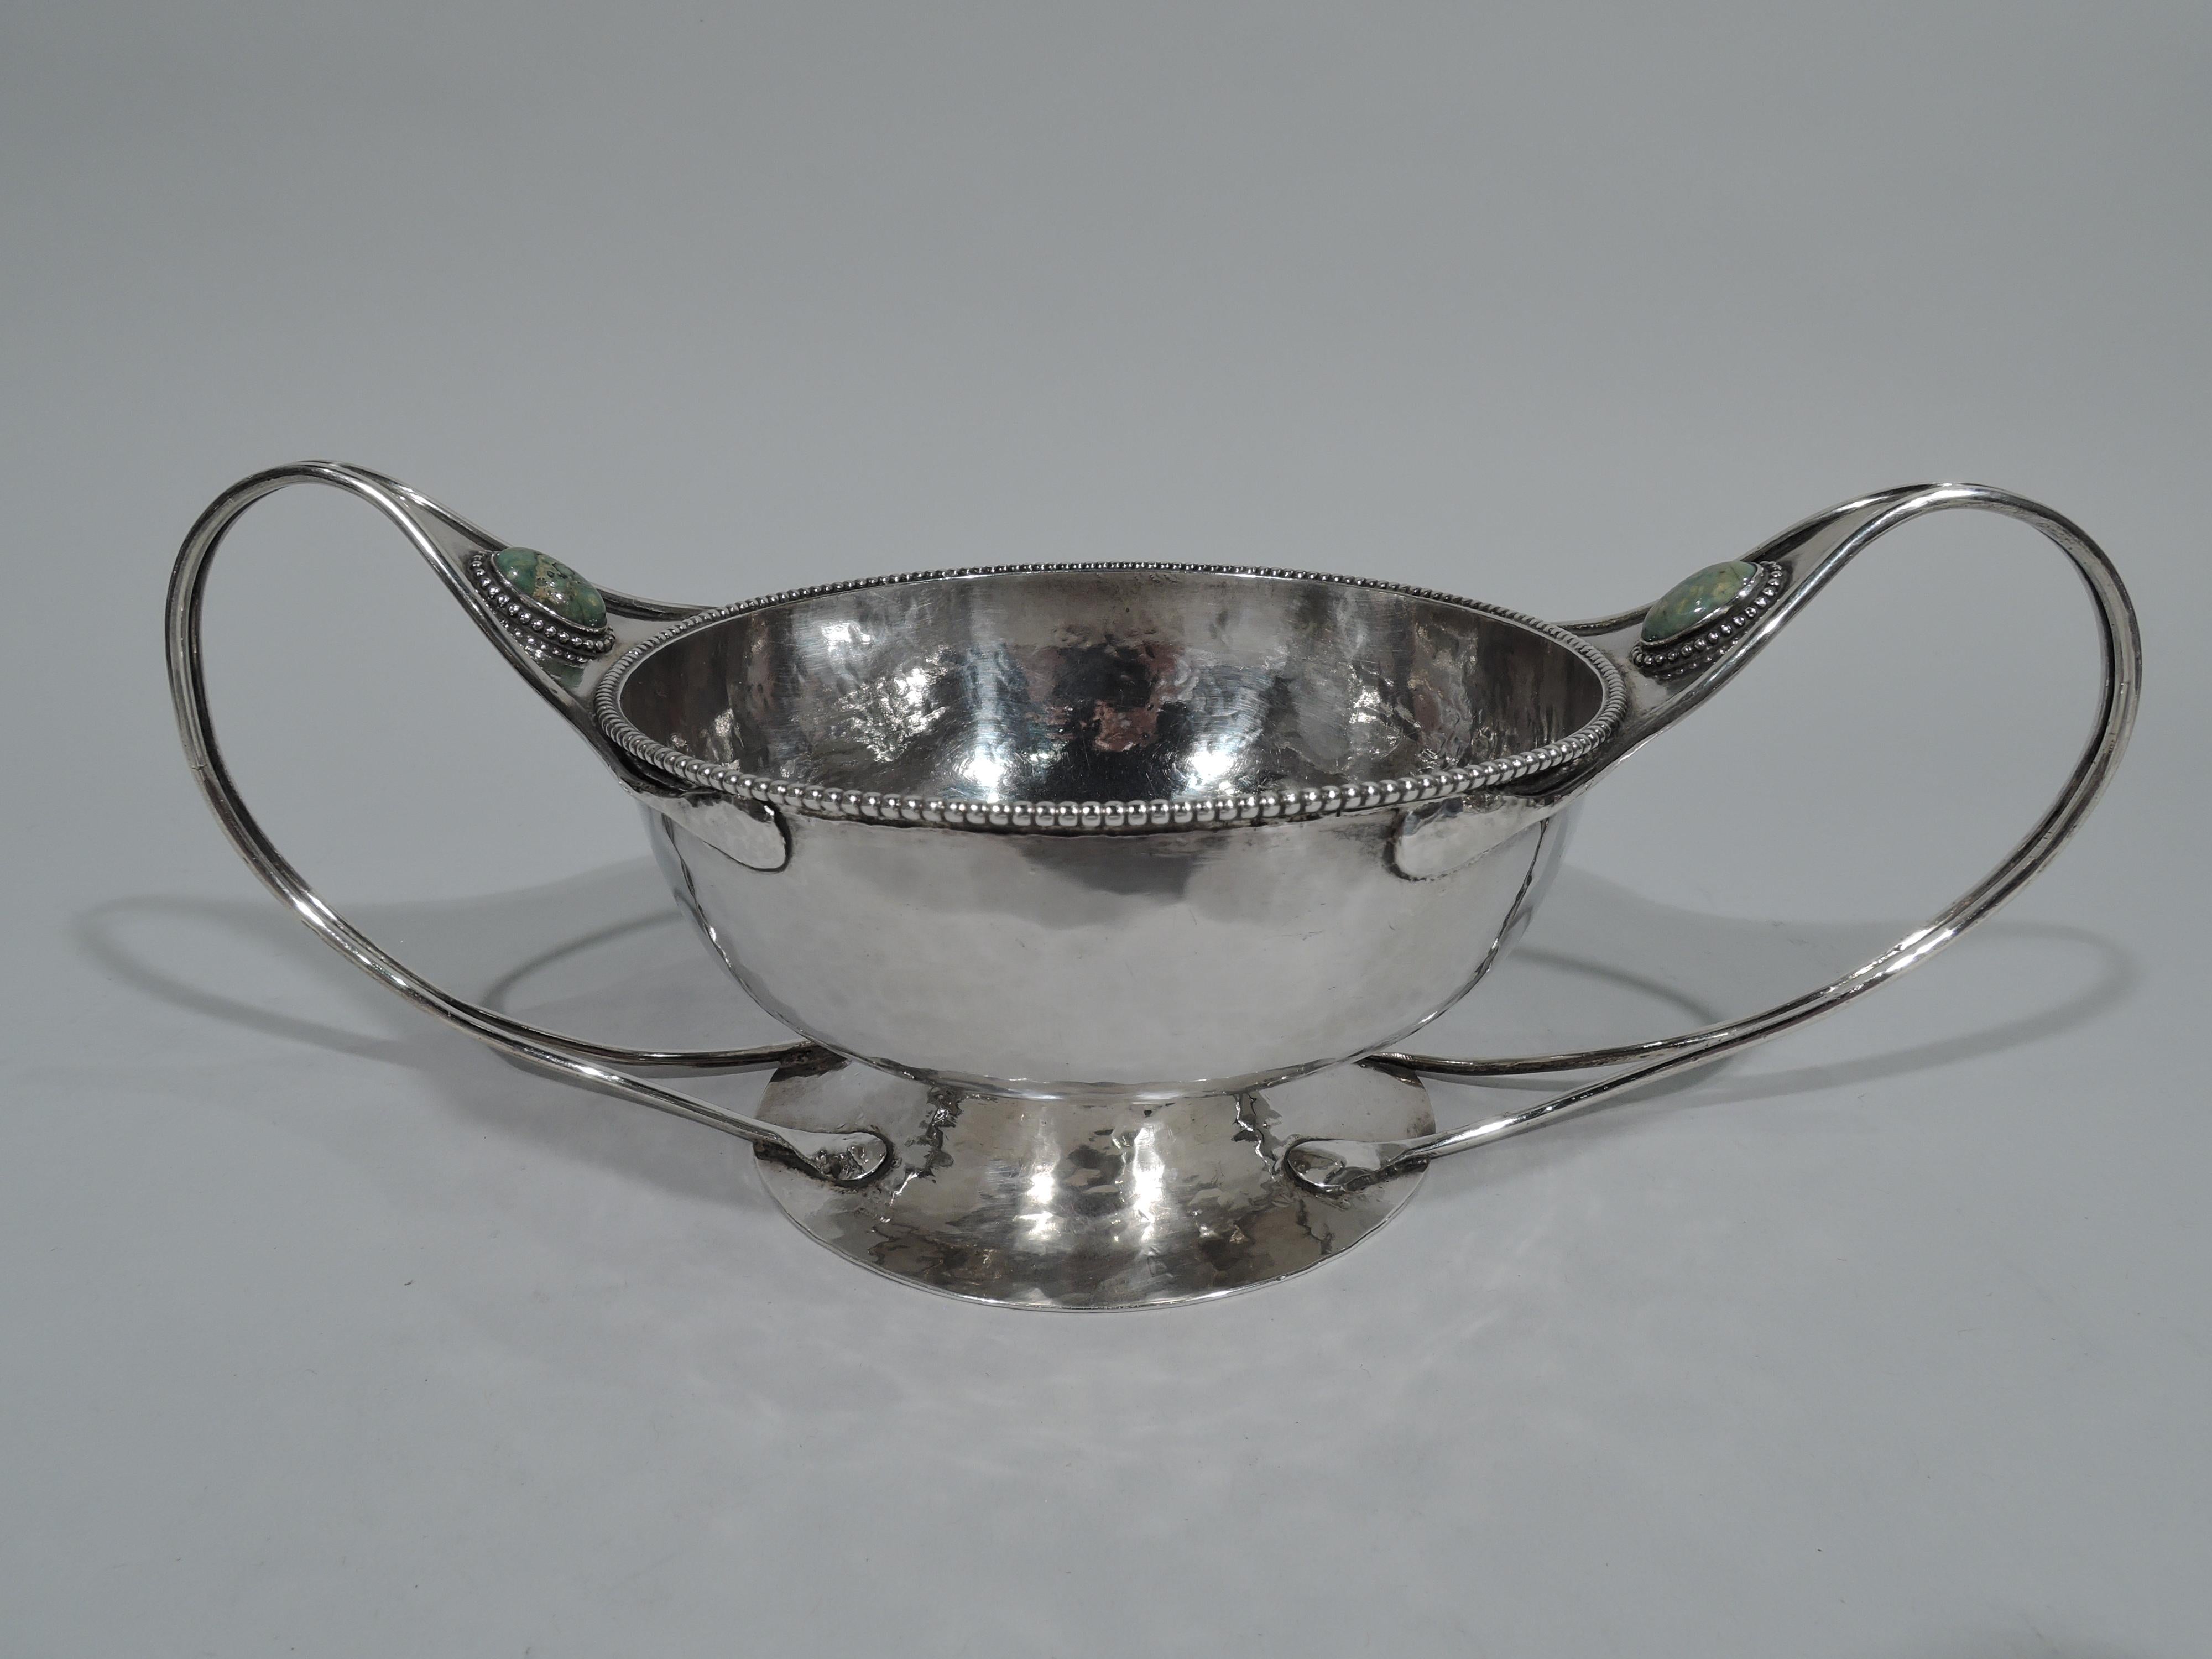 Art & Crafts sterling silver bowl in style of Charles Ashbee. Round with beaded rim and curved sides, and raised and spread foot. Elongated side handles with attenuated split mount and oval cabochon agate bordered by beading. Bowl and foot have